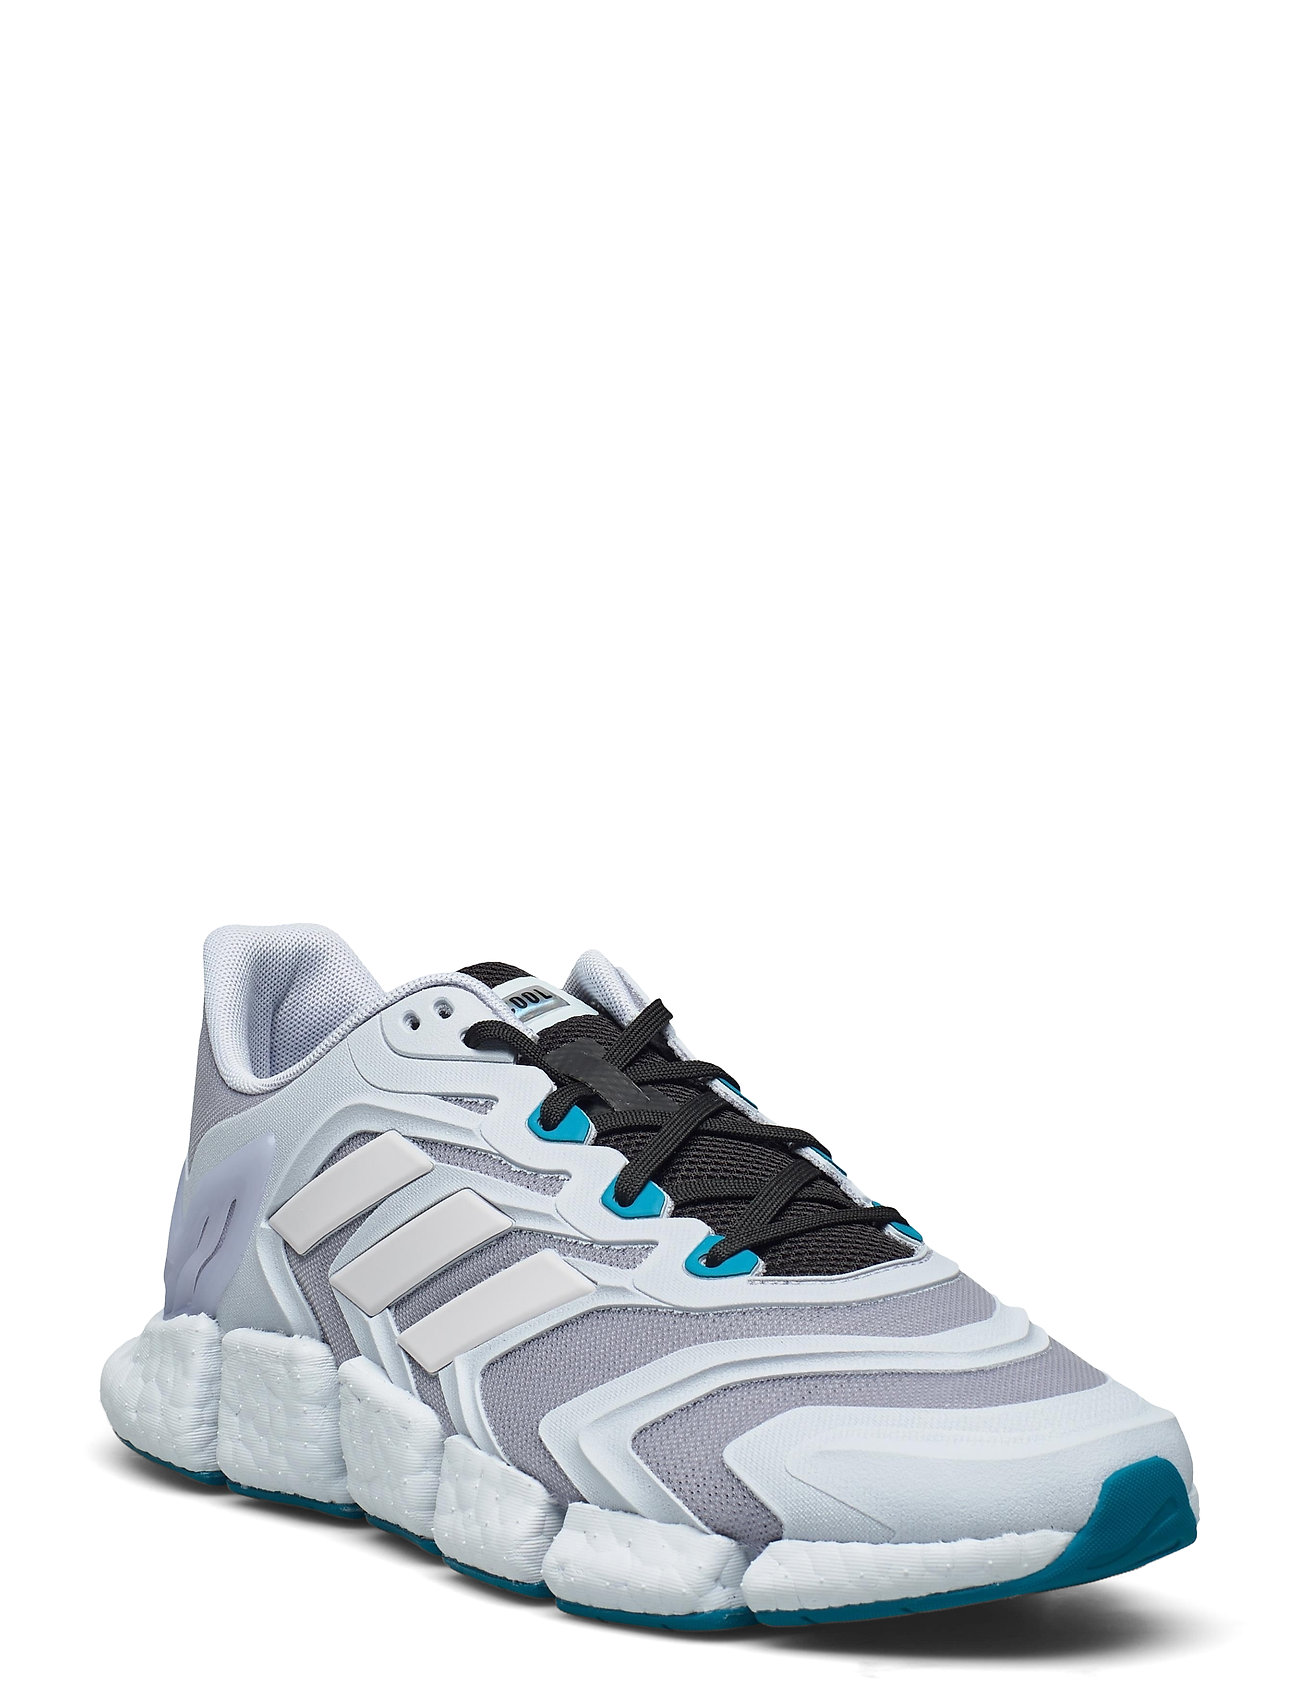 Climacool Vento Heat.Rdy Shoes Sport Shoes Running Shoes Harmaa Adidas Performance, adidas Performance